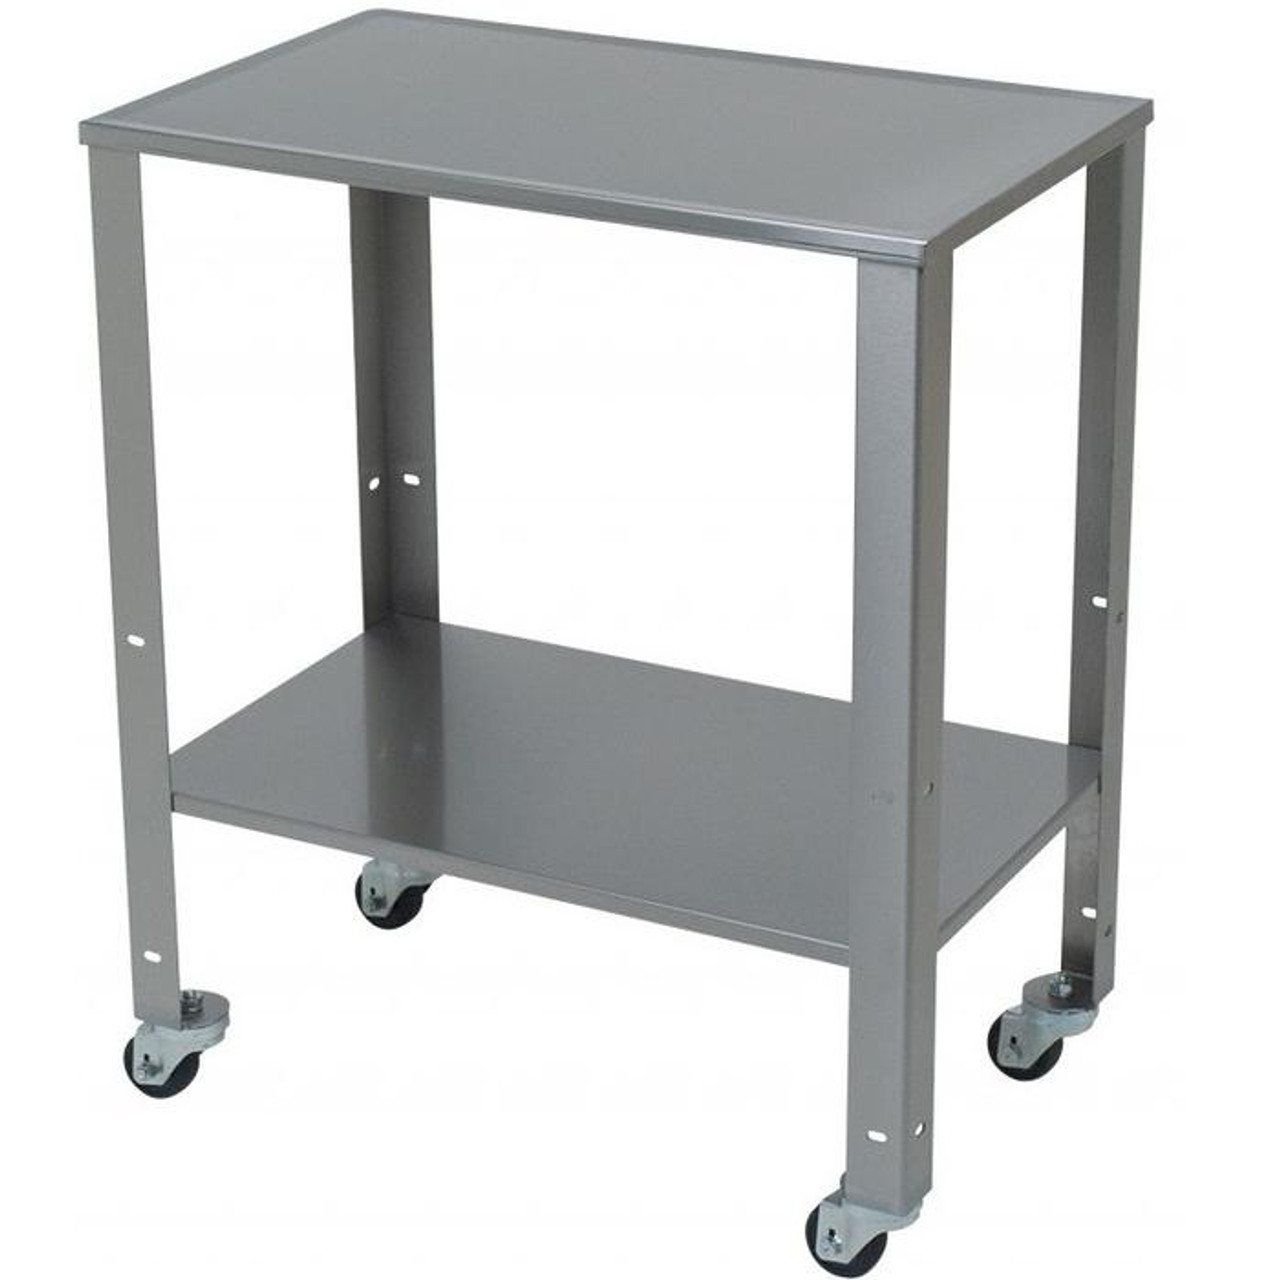 https://store.cevimed.com/images/stencil/1280x1280/products/123033/127440/Detecto_Rolling_Baby_Scale_Cart__73642__43452.1633715569.jpg?c=1